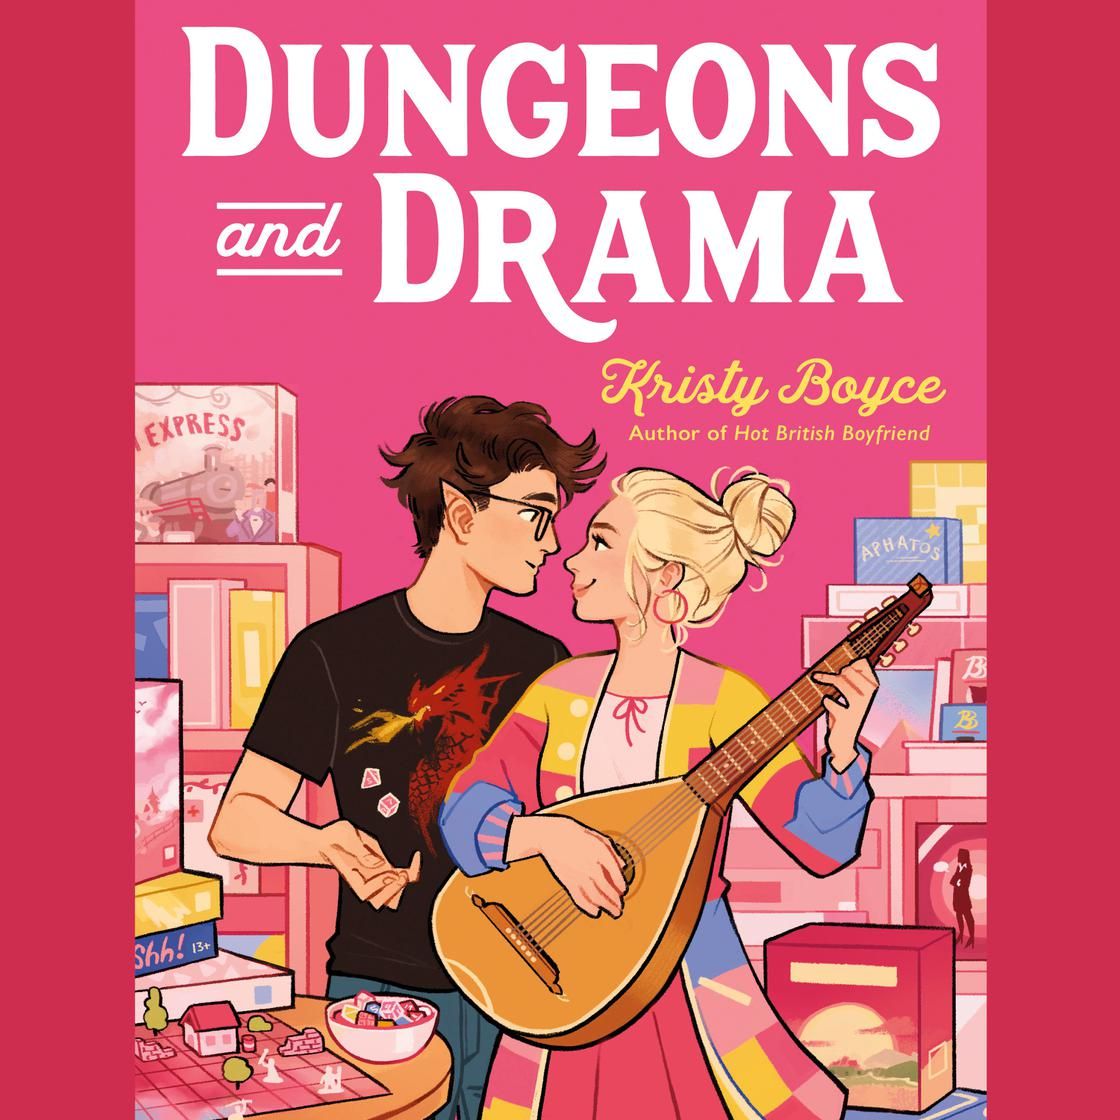 Dungeons and Drama | Libro.fm (US)